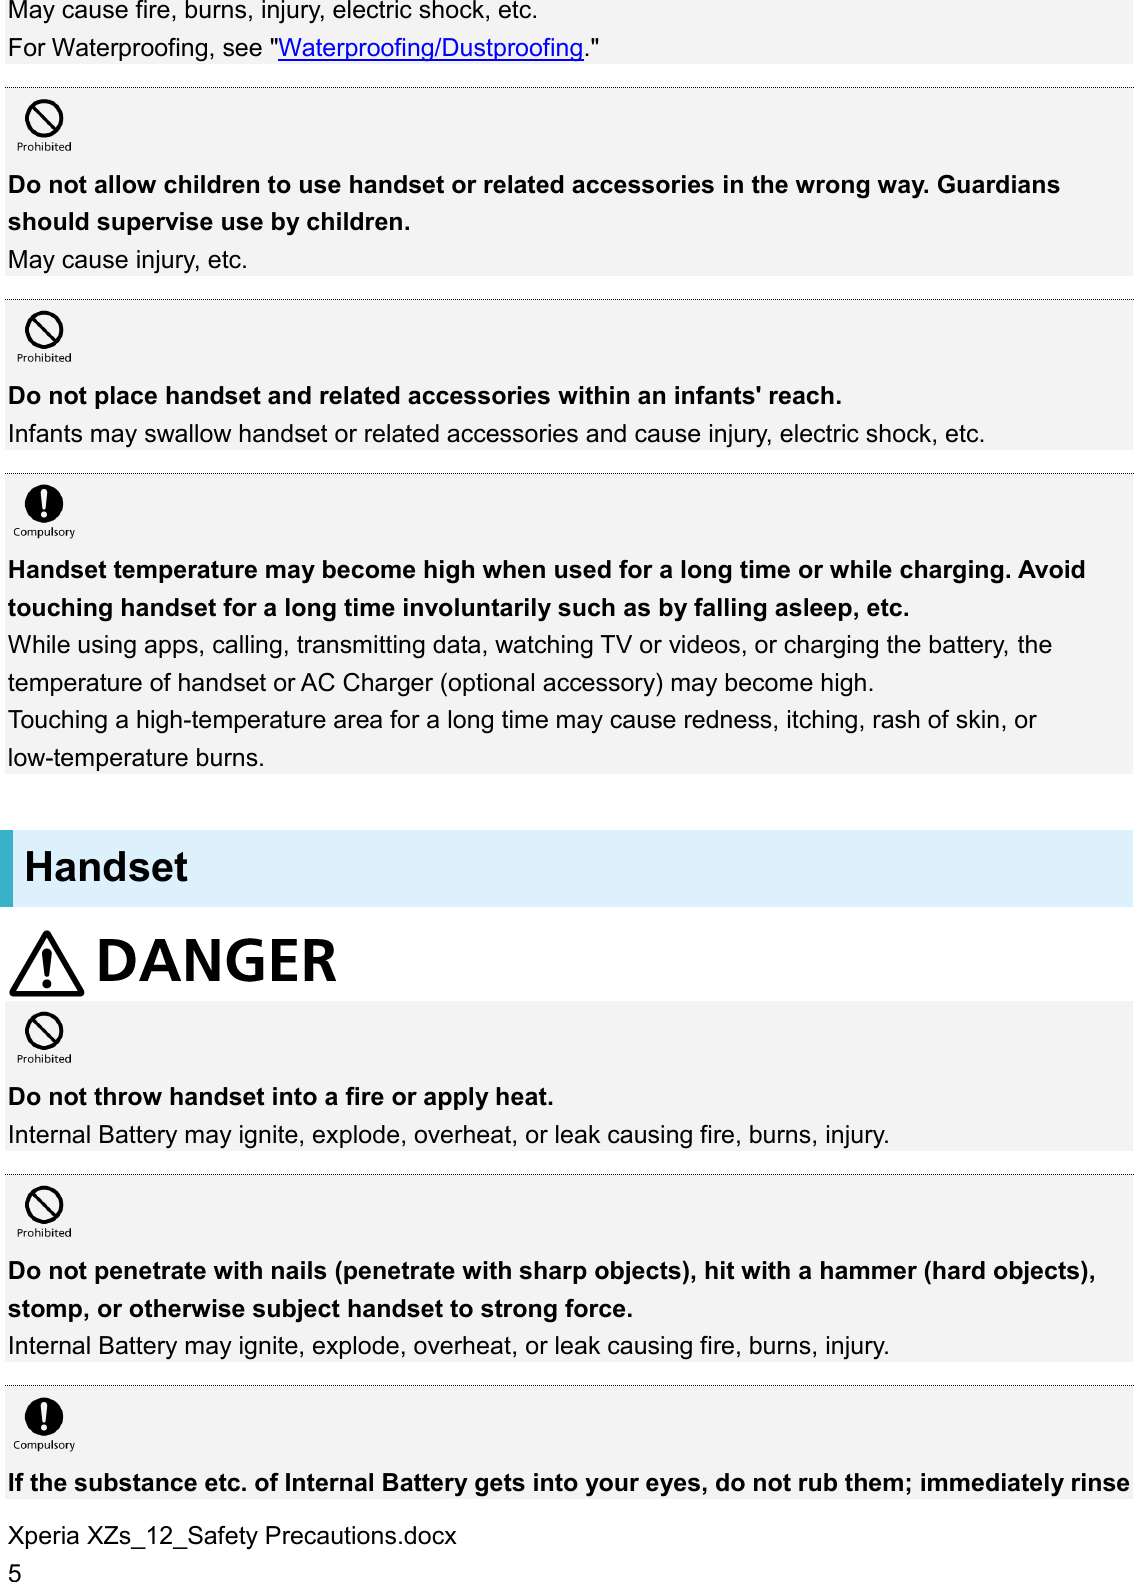 Xperia XZs_12_Safety Precautions.docx 5 May cause fire, burns, injury, electric shock, etc. For Waterproofing, see &quot;Waterproofing/Dustproofing.&quot;   Do not allow children to use handset or related accessories in the wrong way. Guardians should supervise use by children. May cause injury, etc.   Do not place handset and related accessories within an infants&apos; reach. Infants may swallow handset or related accessories and cause injury, electric shock, etc.   Handset temperature may become high when used for a long time or while charging. Avoid touching handset for a long time involuntarily such as by falling asleep, etc. While using apps, calling, transmitting data, watching TV or videos, or charging the battery, the temperature of handset or AC Charger (optional accessory) may become high. Touching a high-temperature area for a long time may cause redness, itching, rash of skin, or low-temperature burns. Handset   Do not throw handset into a fire or apply heat. Internal Battery may ignite, explode, overheat, or leak causing fire, burns, injury.   Do not penetrate with nails (penetrate with sharp objects), hit with a hammer (hard objects), stomp, or otherwise subject handset to strong force. Internal Battery may ignite, explode, overheat, or leak causing fire, burns, injury.   If the substance etc. of Internal Battery gets into your eyes, do not rub them; immediately rinse 